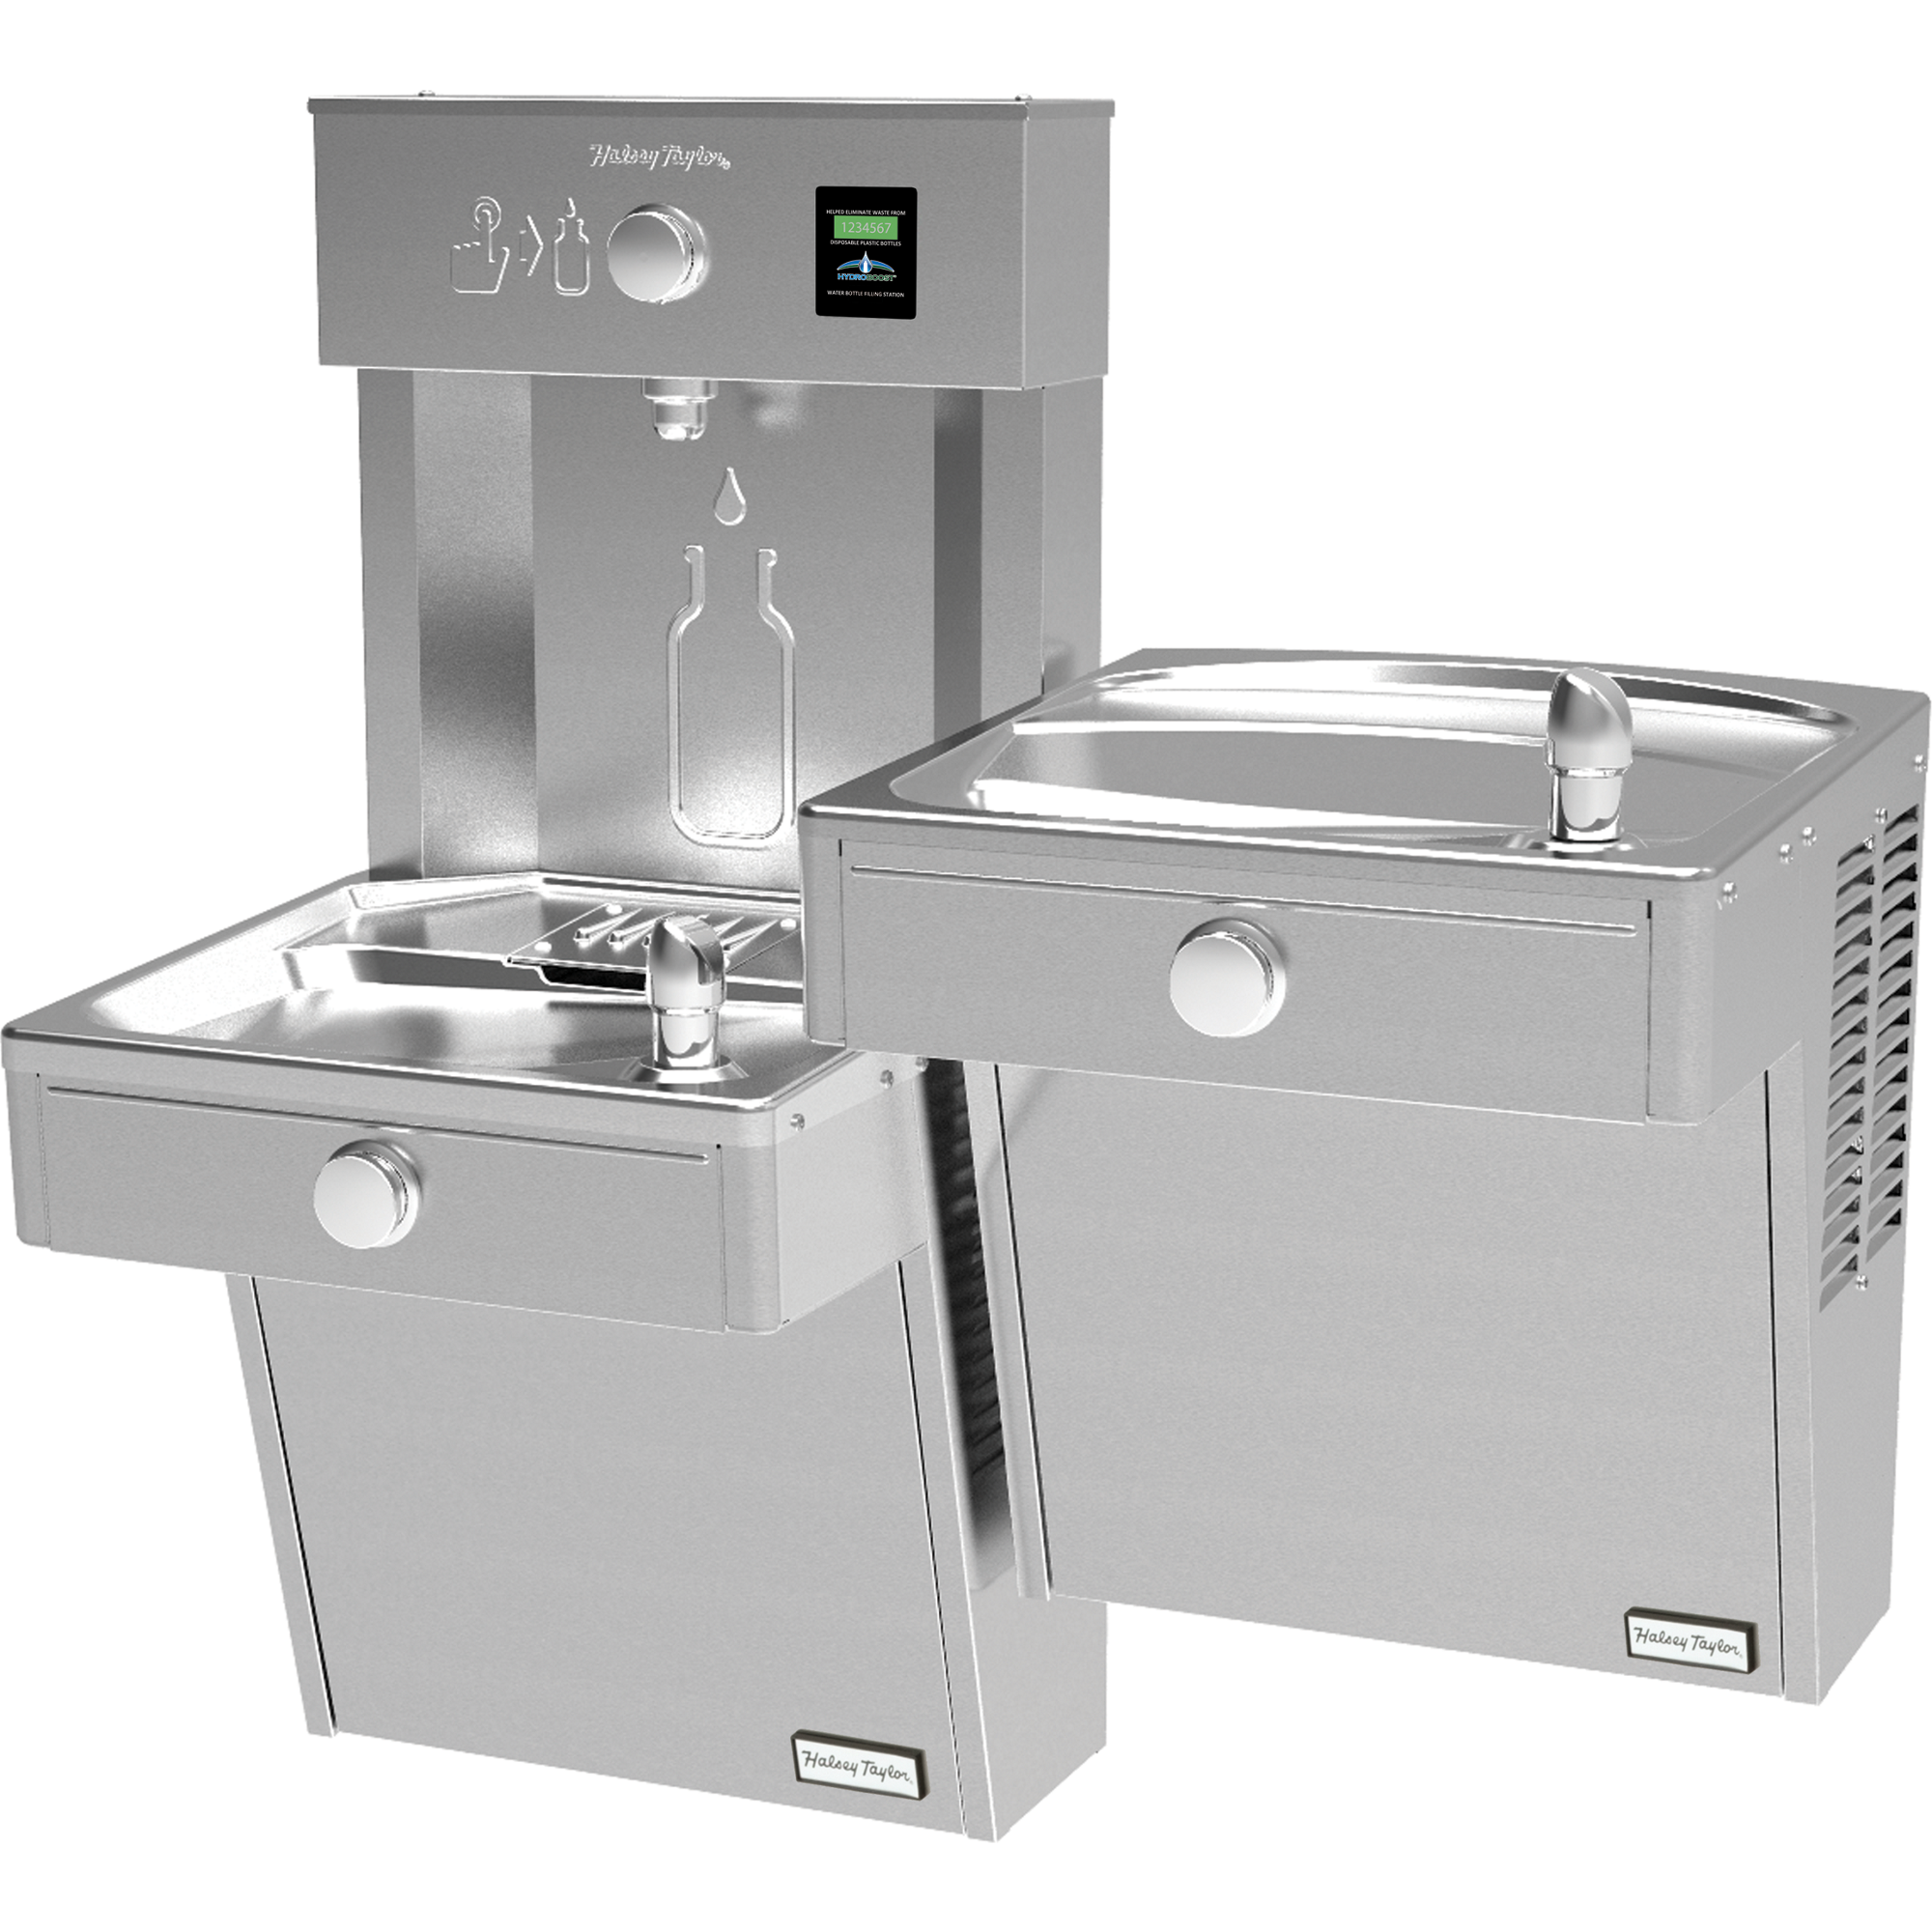 Halsey Taylor HTHBHVRBLR-NF | Wall-mounted Bi-level Bottle Filling Station | Filterless, Non-refrigerated, Vandal-resistant, Reverse fountains, Stainless Steel color finish